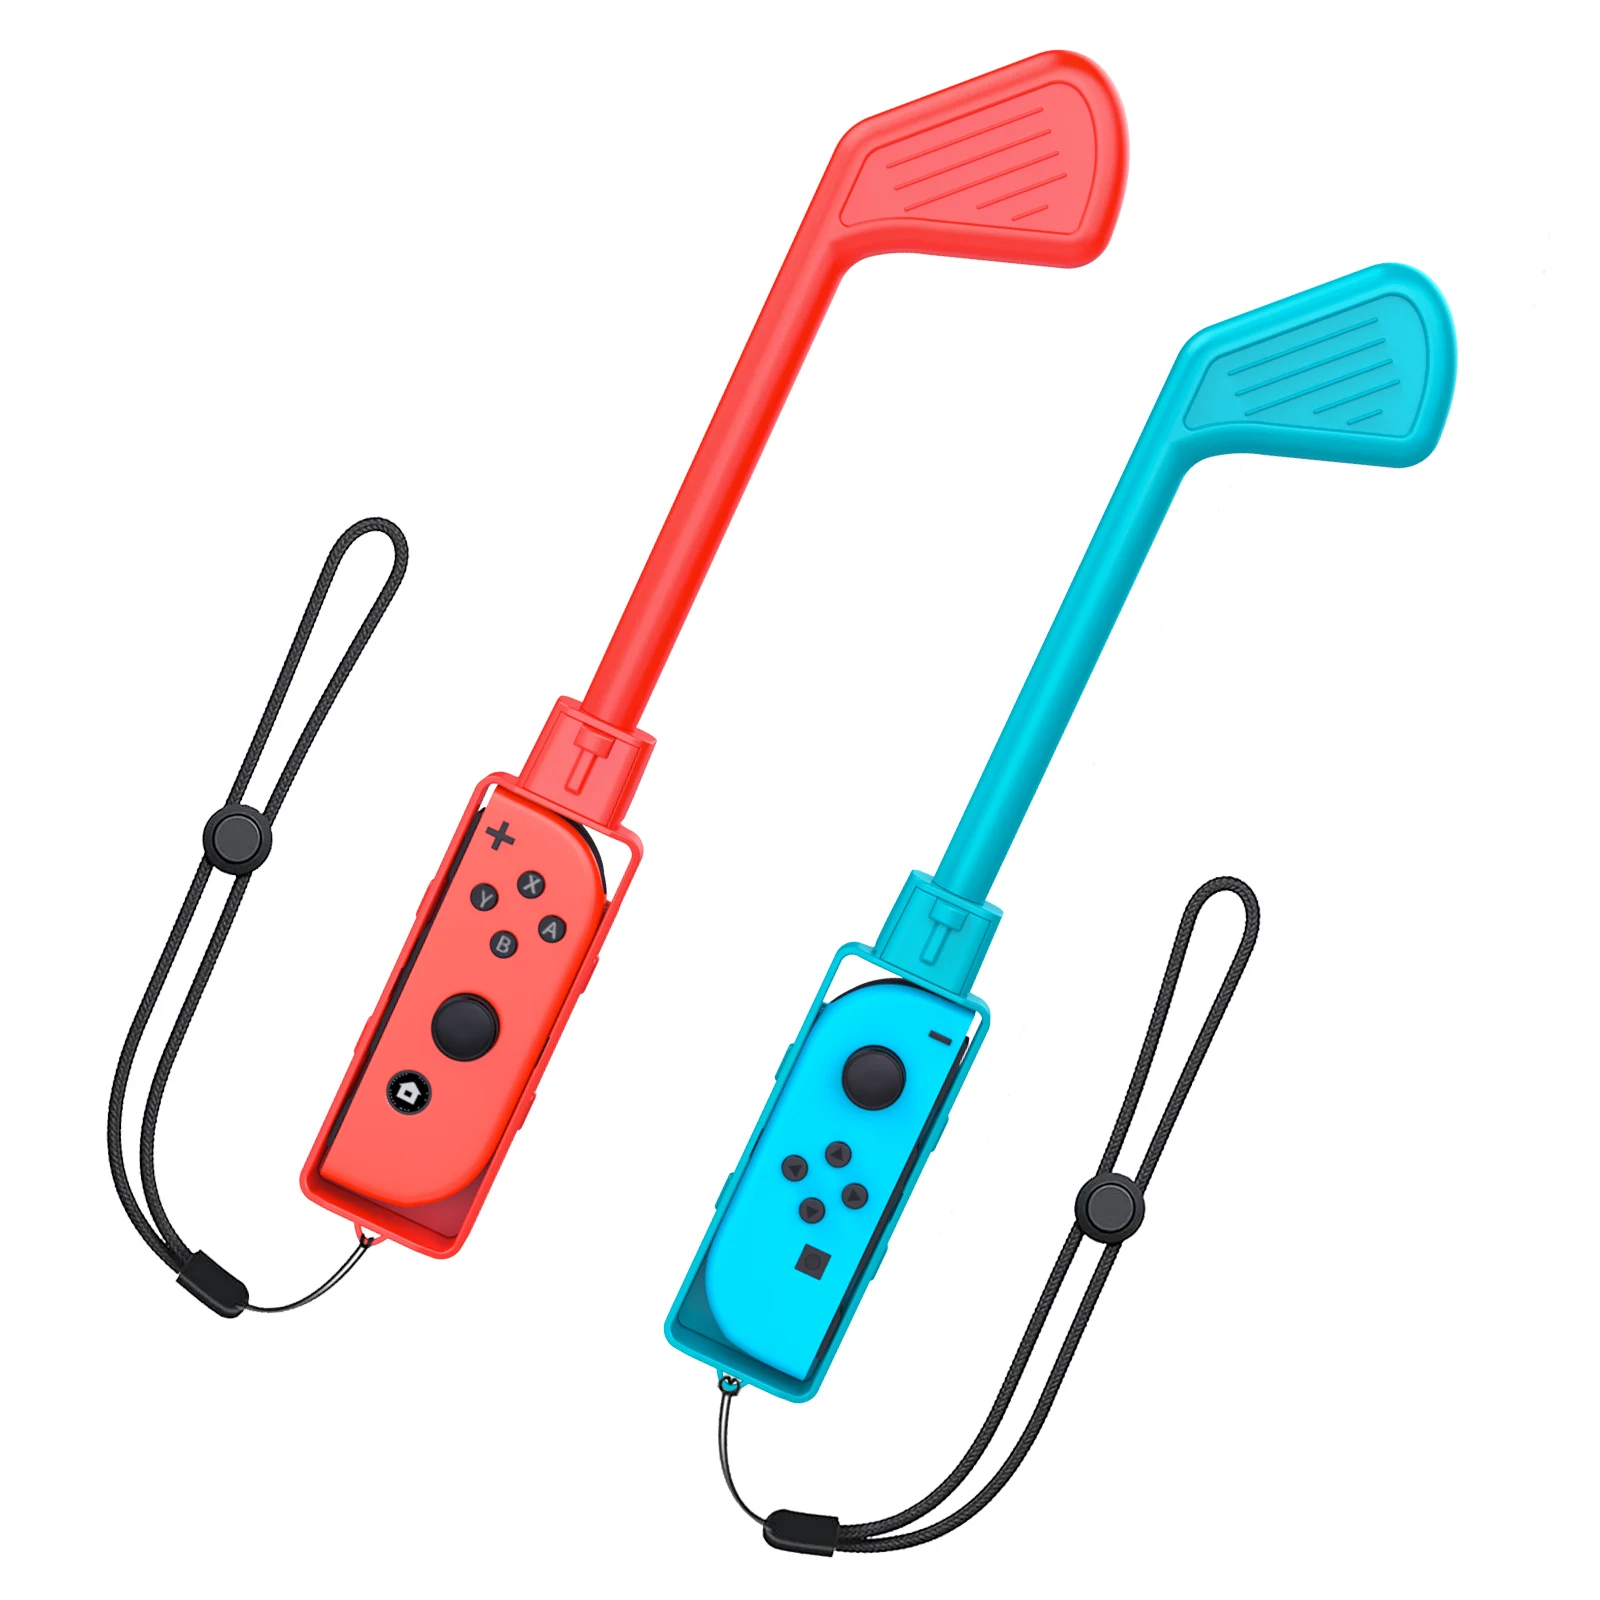 2 Pack Golf Clubs for Nintendo Switch Mario Golf,Super Rush Game,Golf Handle with Hand Strap Game Accessories Golf Grips Joy-Con